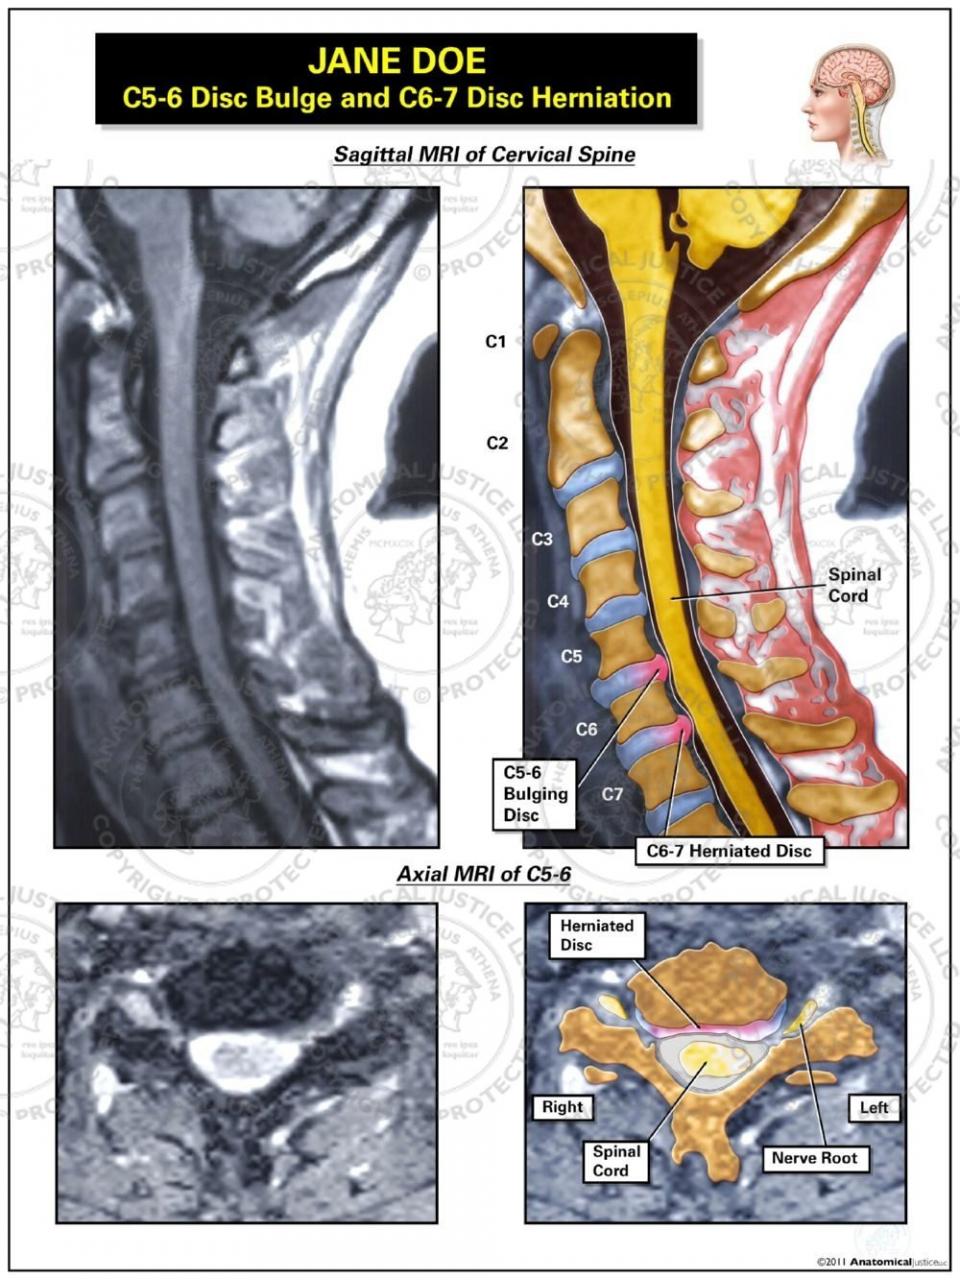 Lateral MRI of Cervical Disc Herniation at C5-C6